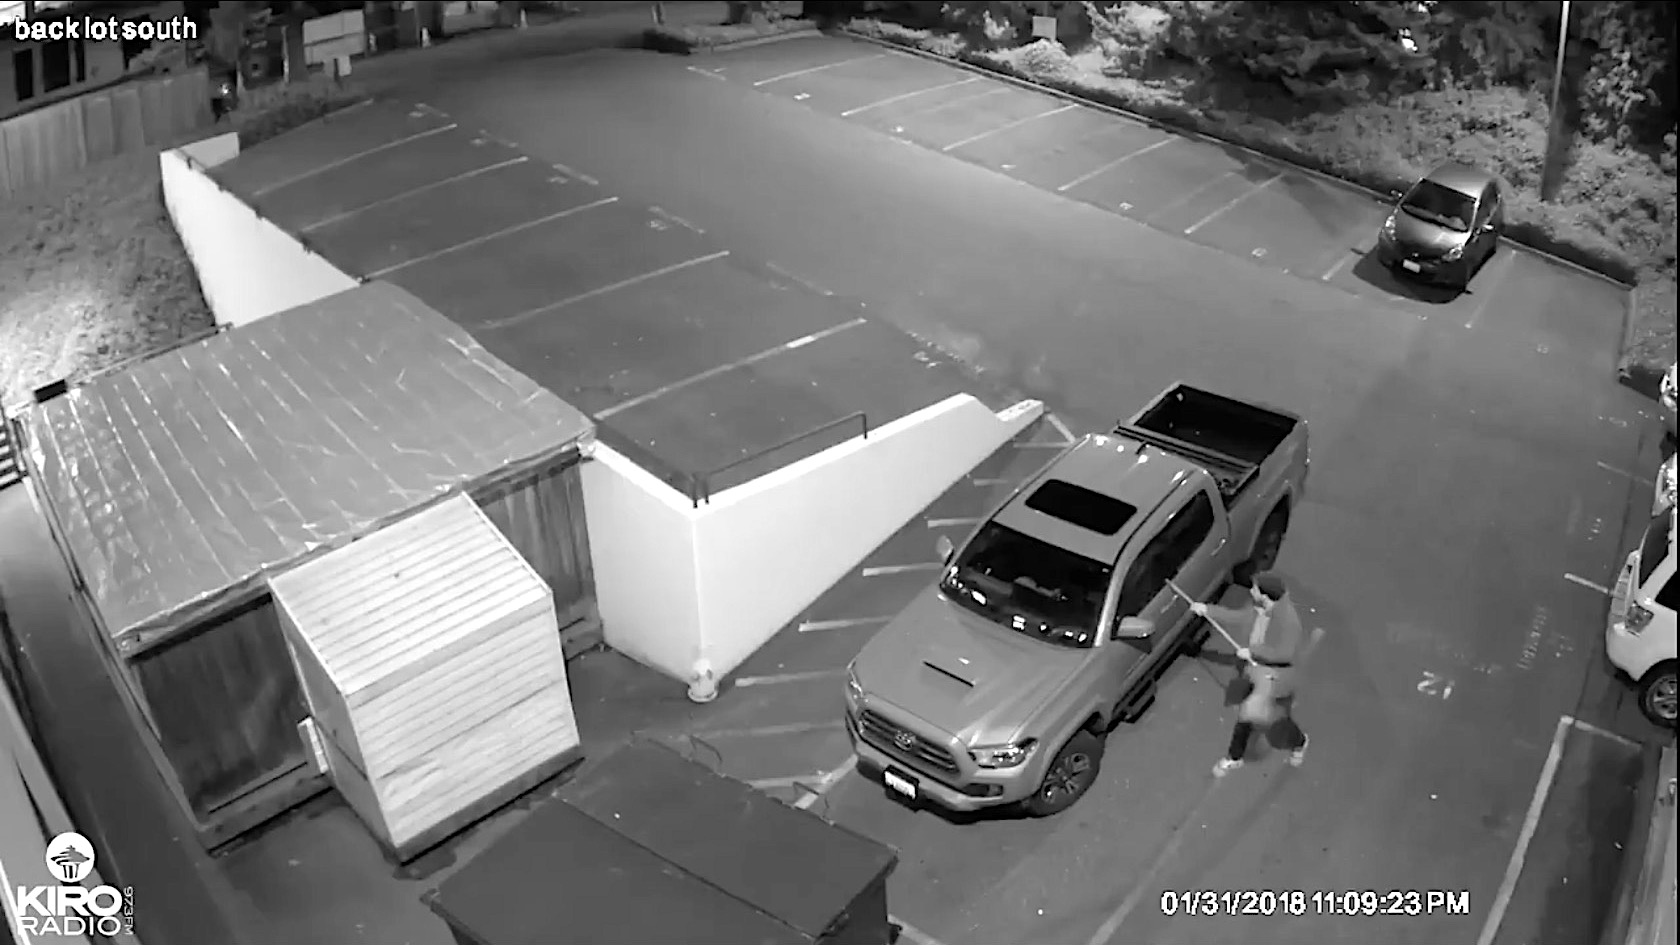 A vandal tries to break into a truck at KIRO radio